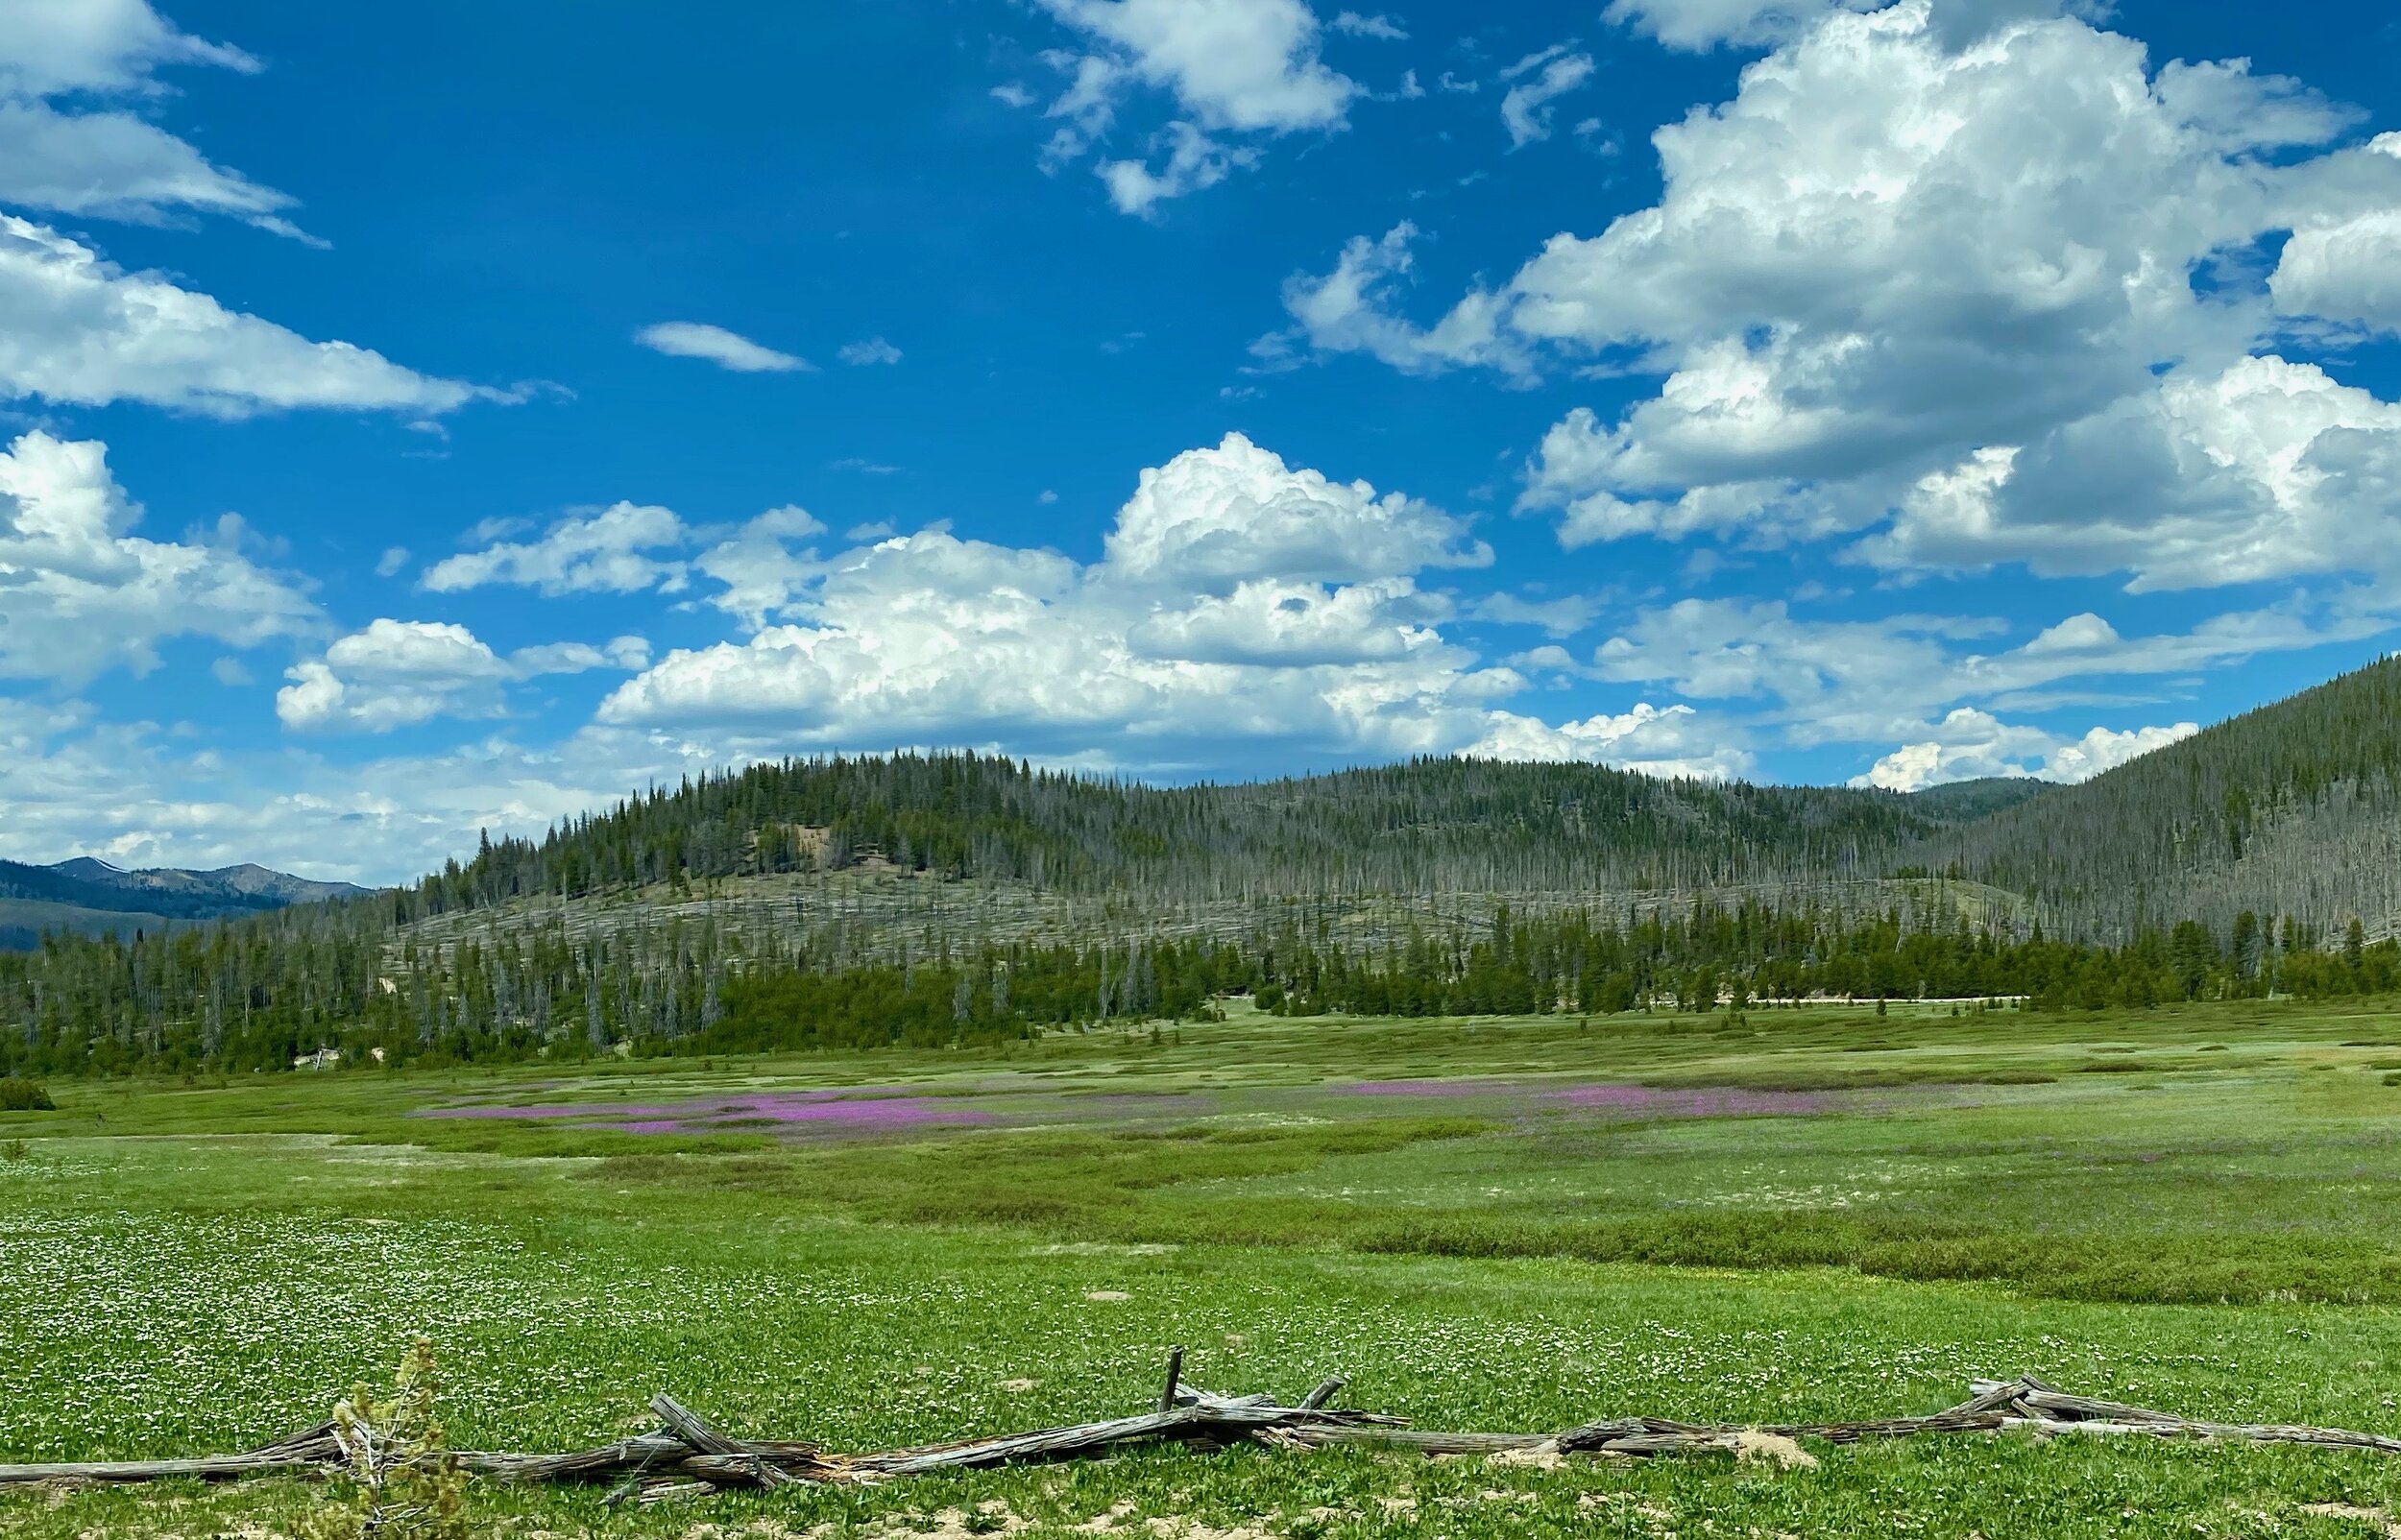 Amazing purple wildflowers in the field as we pass through the Sawtooth Mountains.  Photo by Karen Boudreaux, June 3, 2021